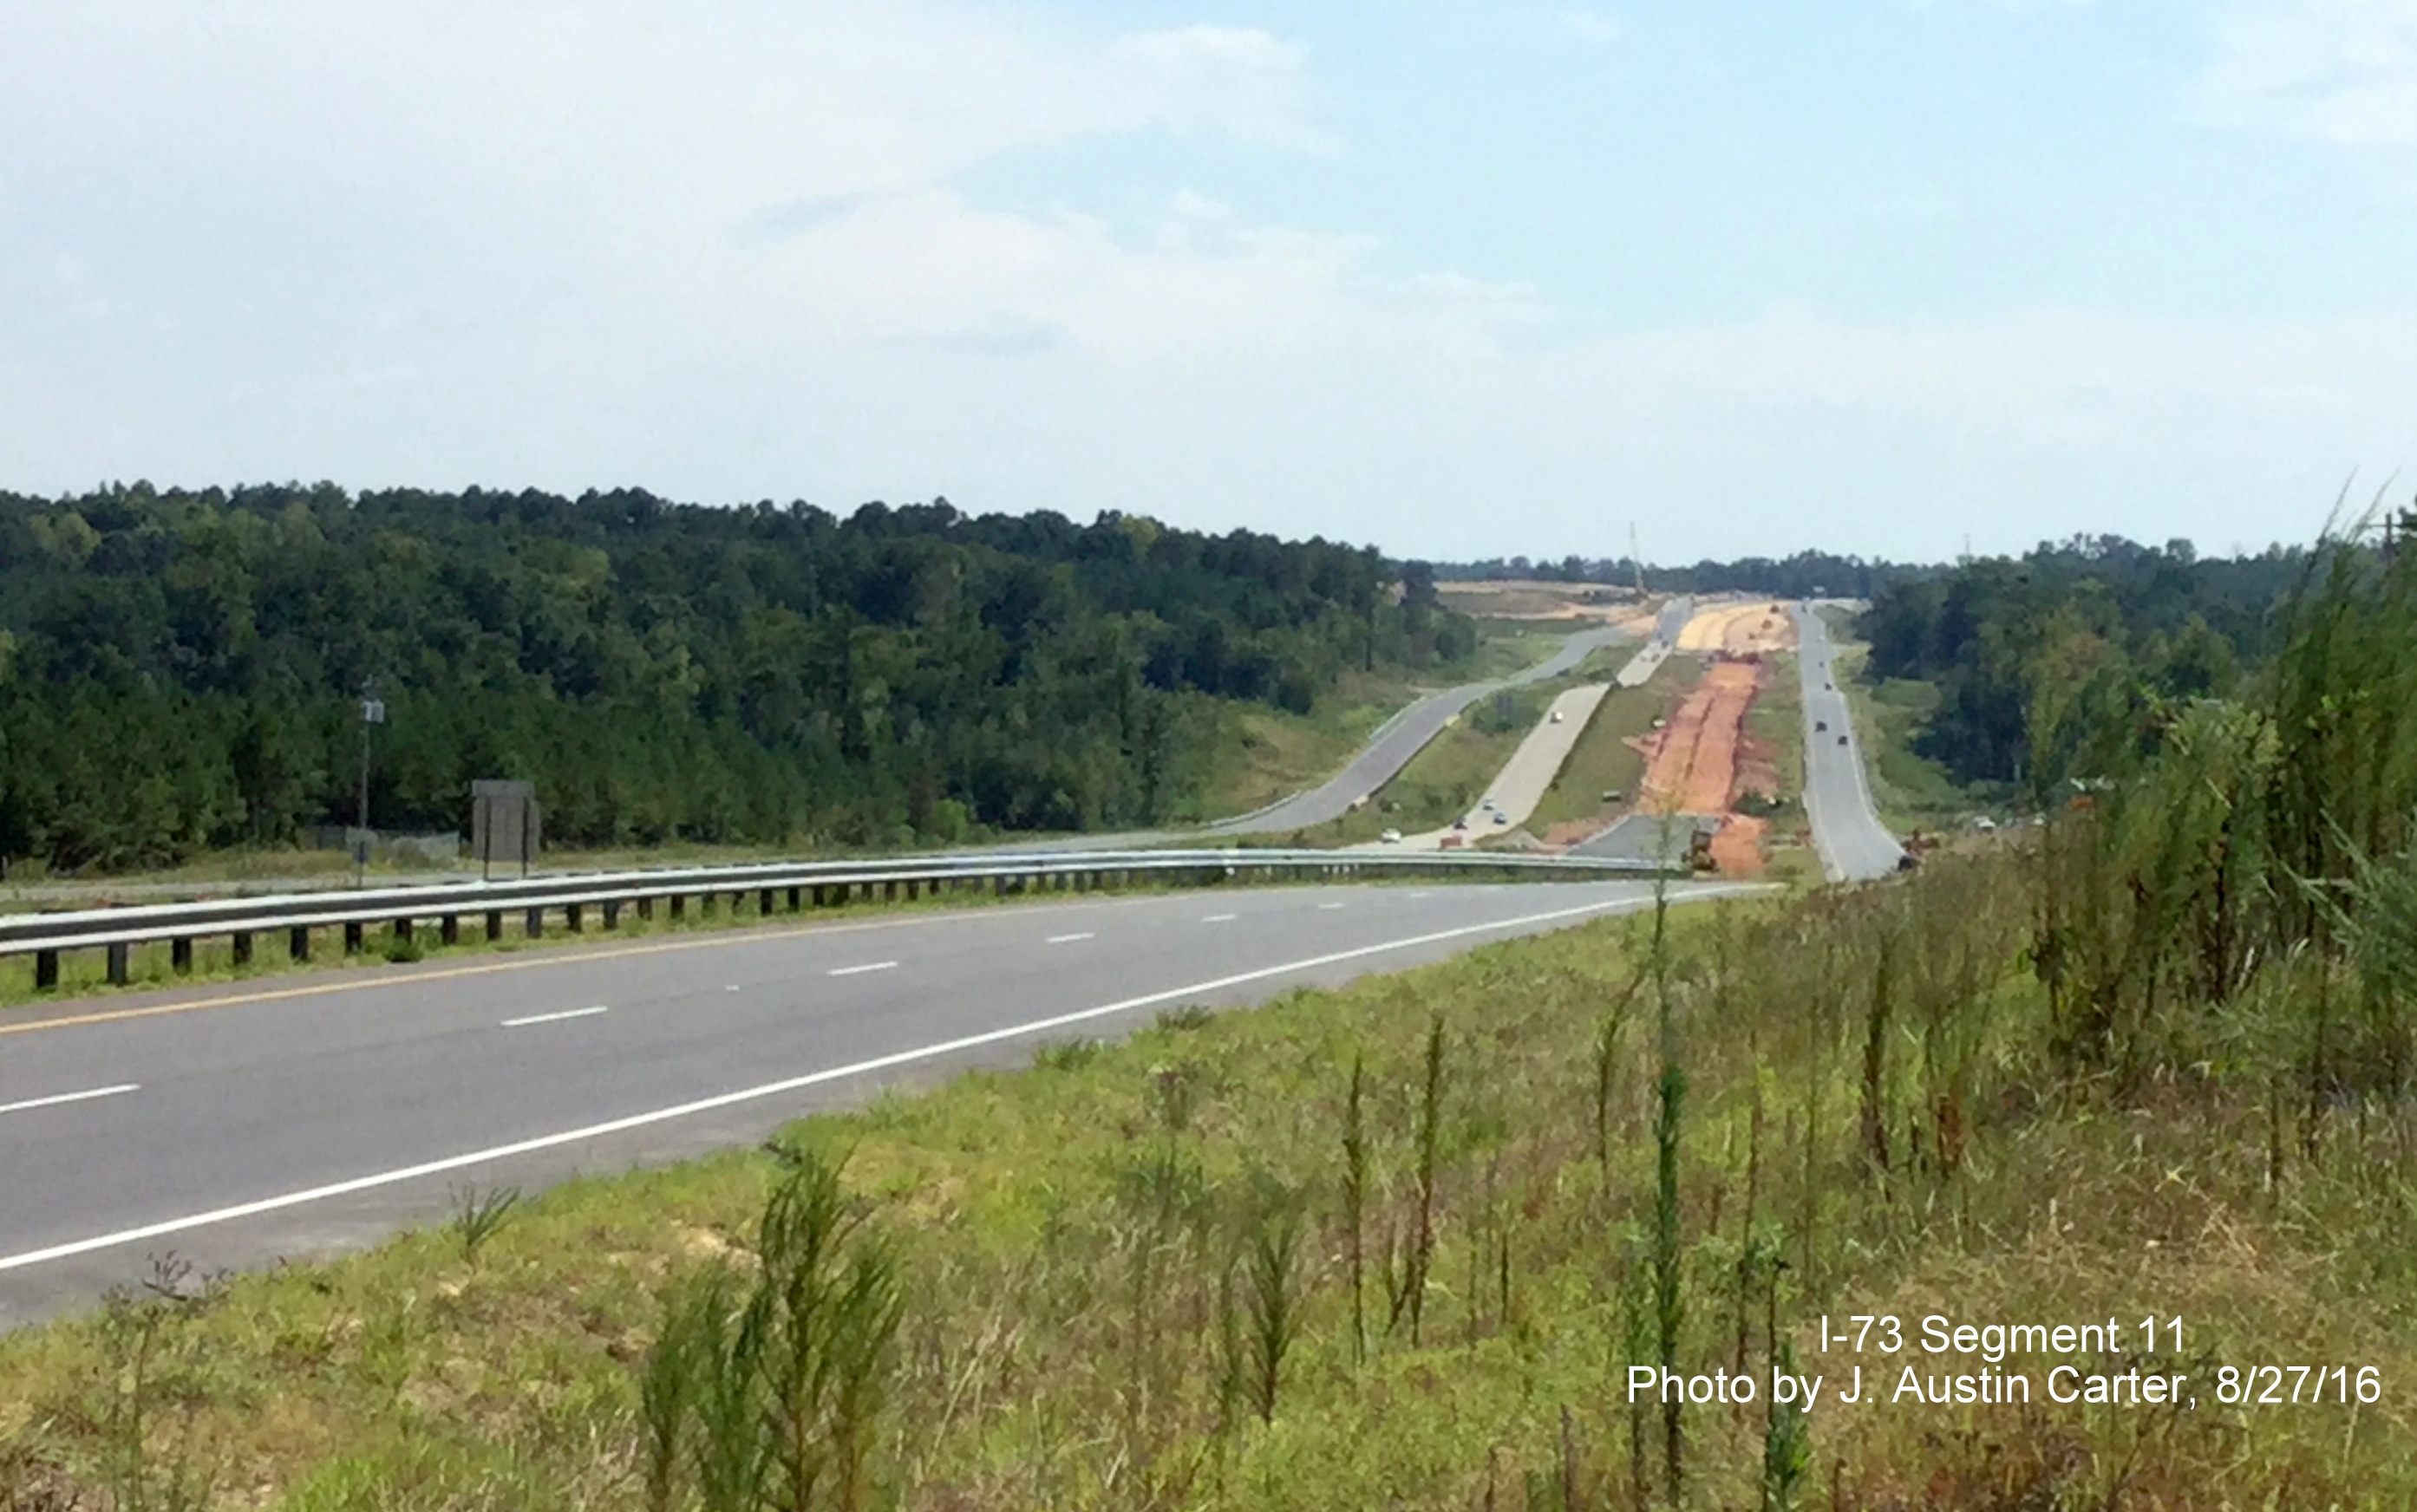 Image of US 220 looking south showing progress in building frontage roads along future I-73/74, from J. Austin Carter